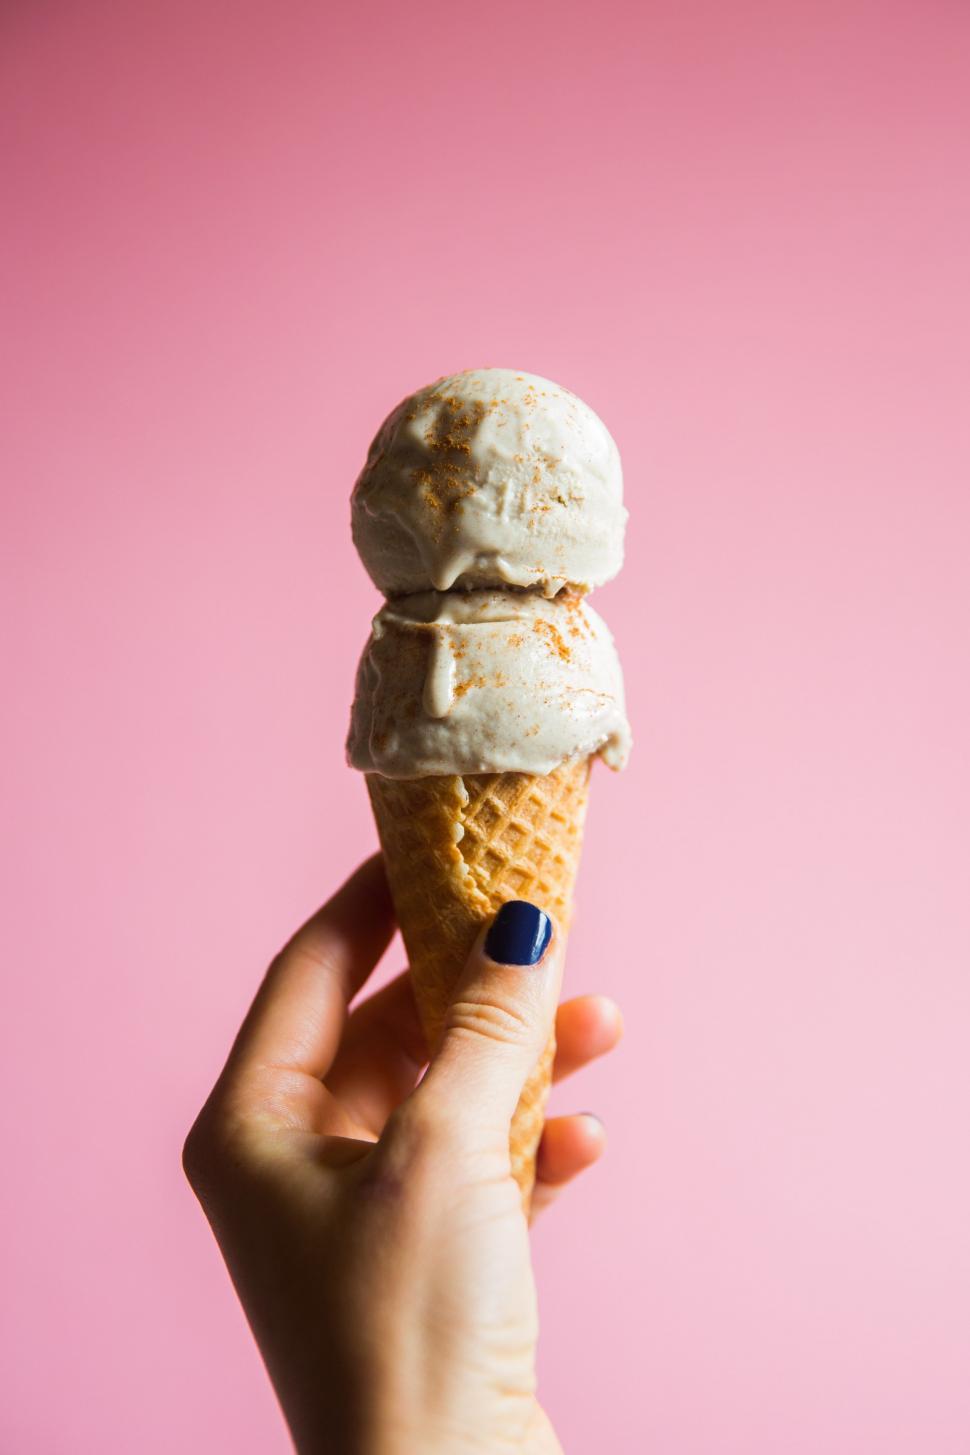 Free Image of Hand Holding Ice Cream Cone Against Pink Background 